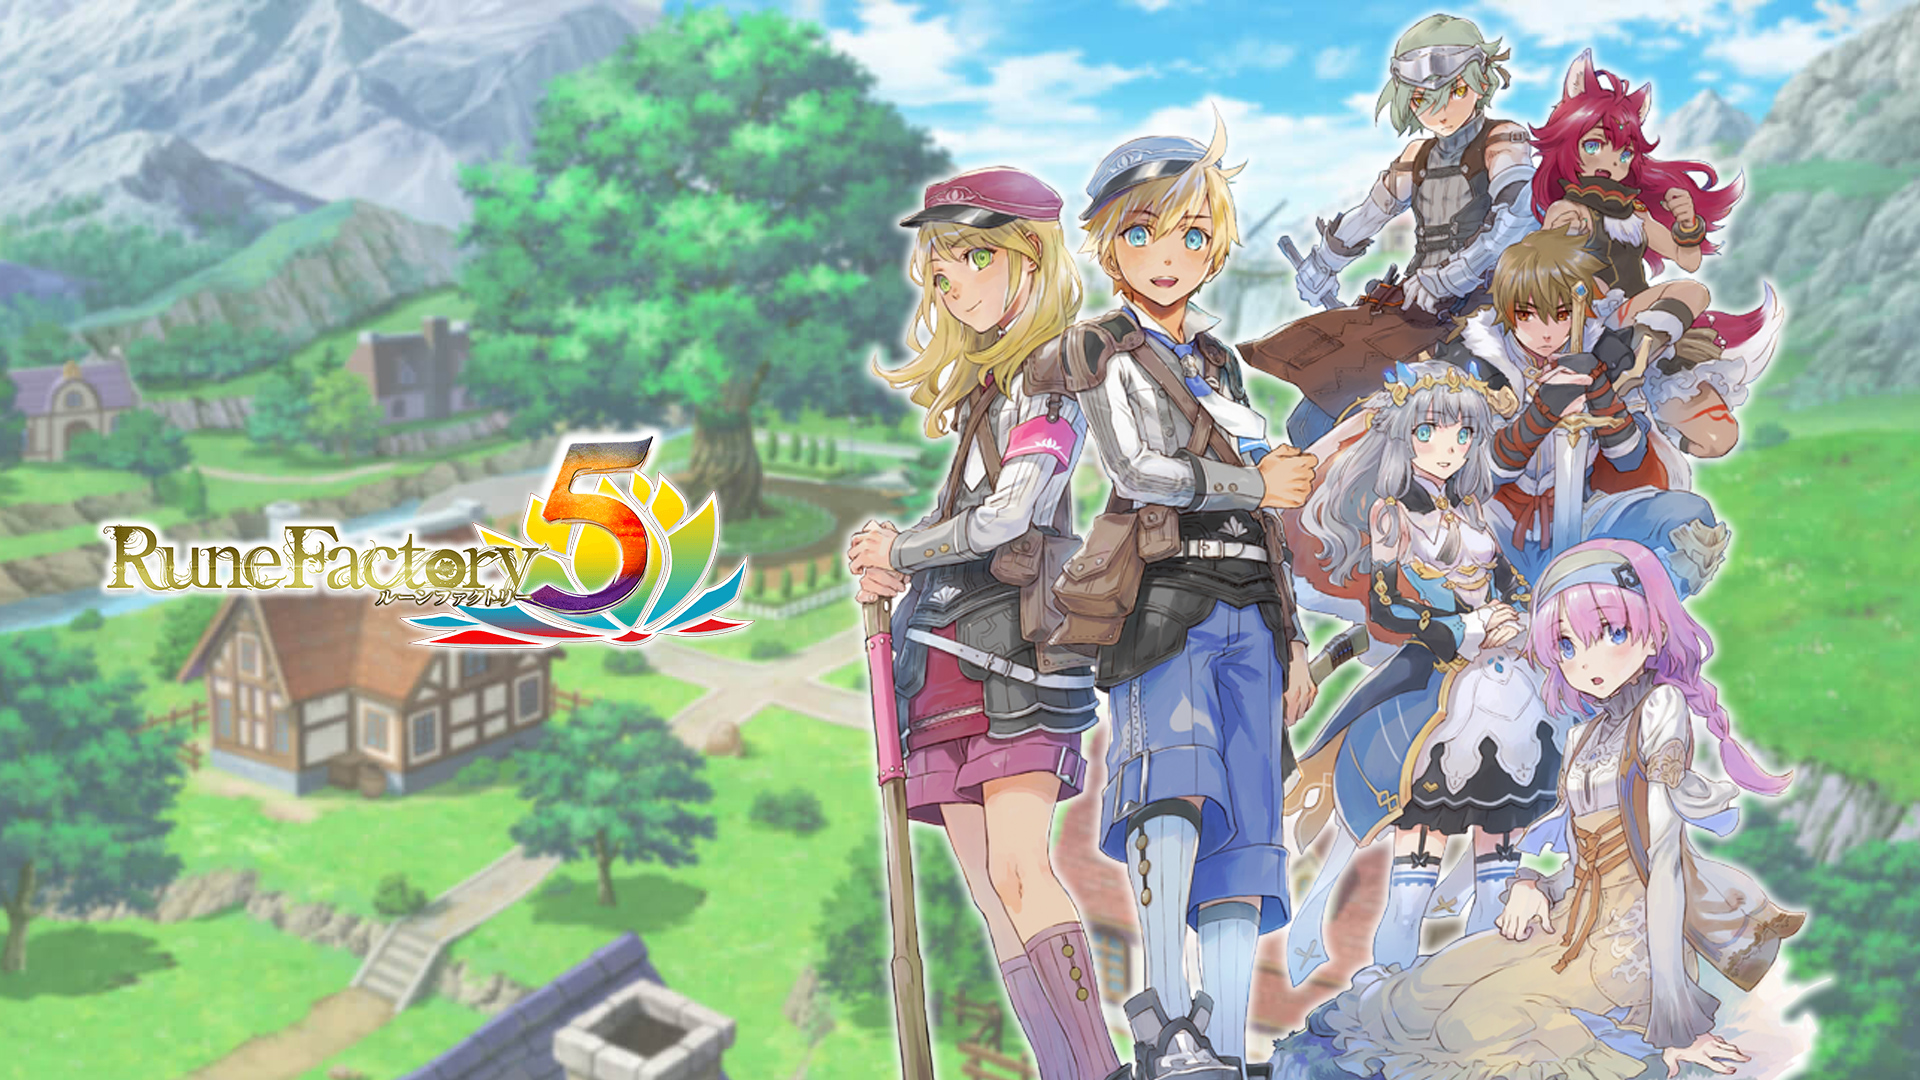 rune factory 4 special us release date